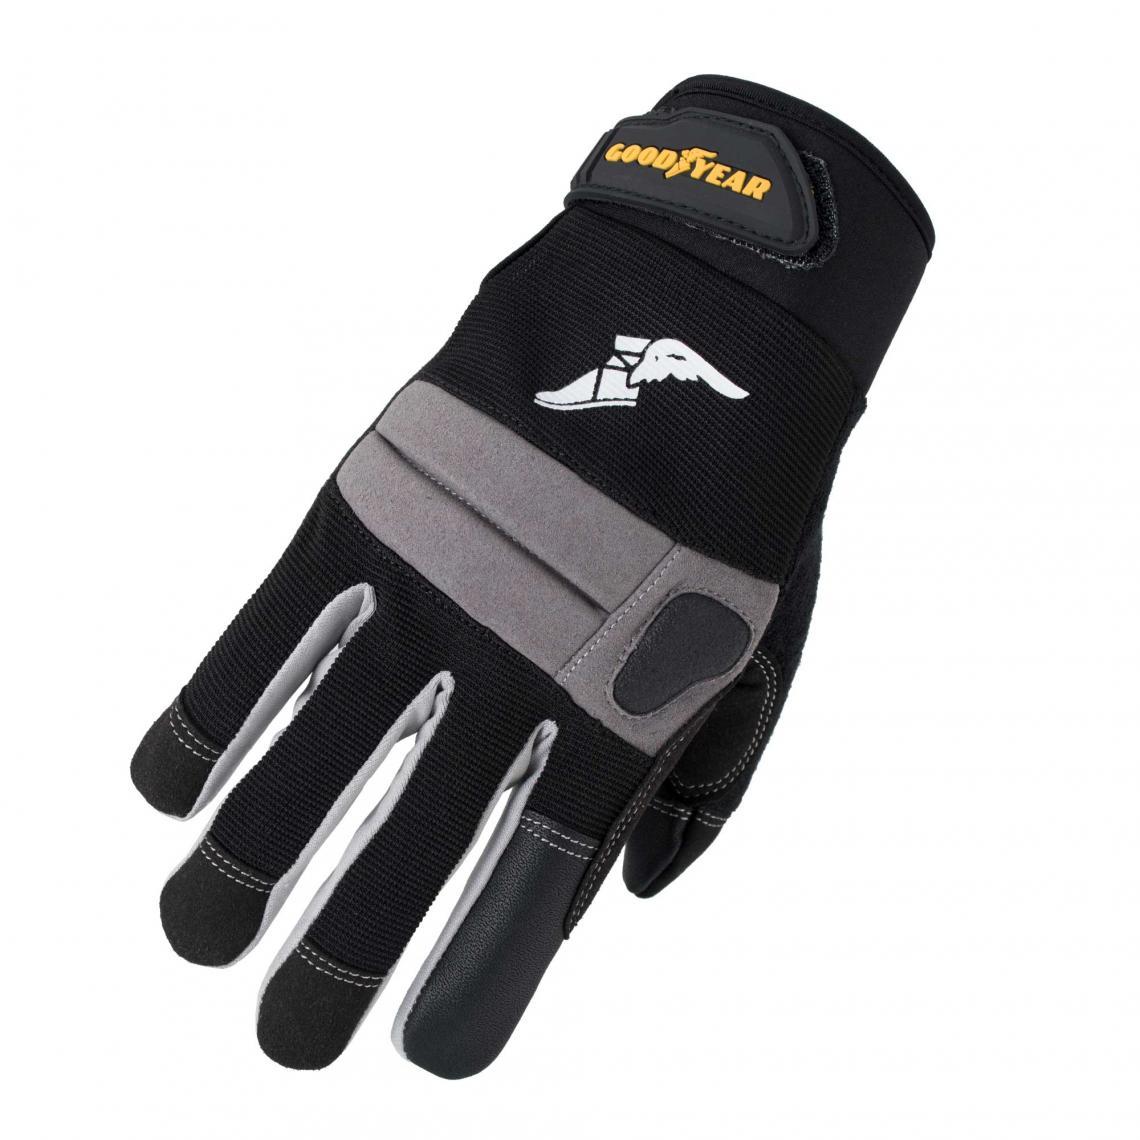 Goodyear Silicone Palm Thinsulate Lined Winter Work Gloves Work Gloves and Hats - Cleanflow